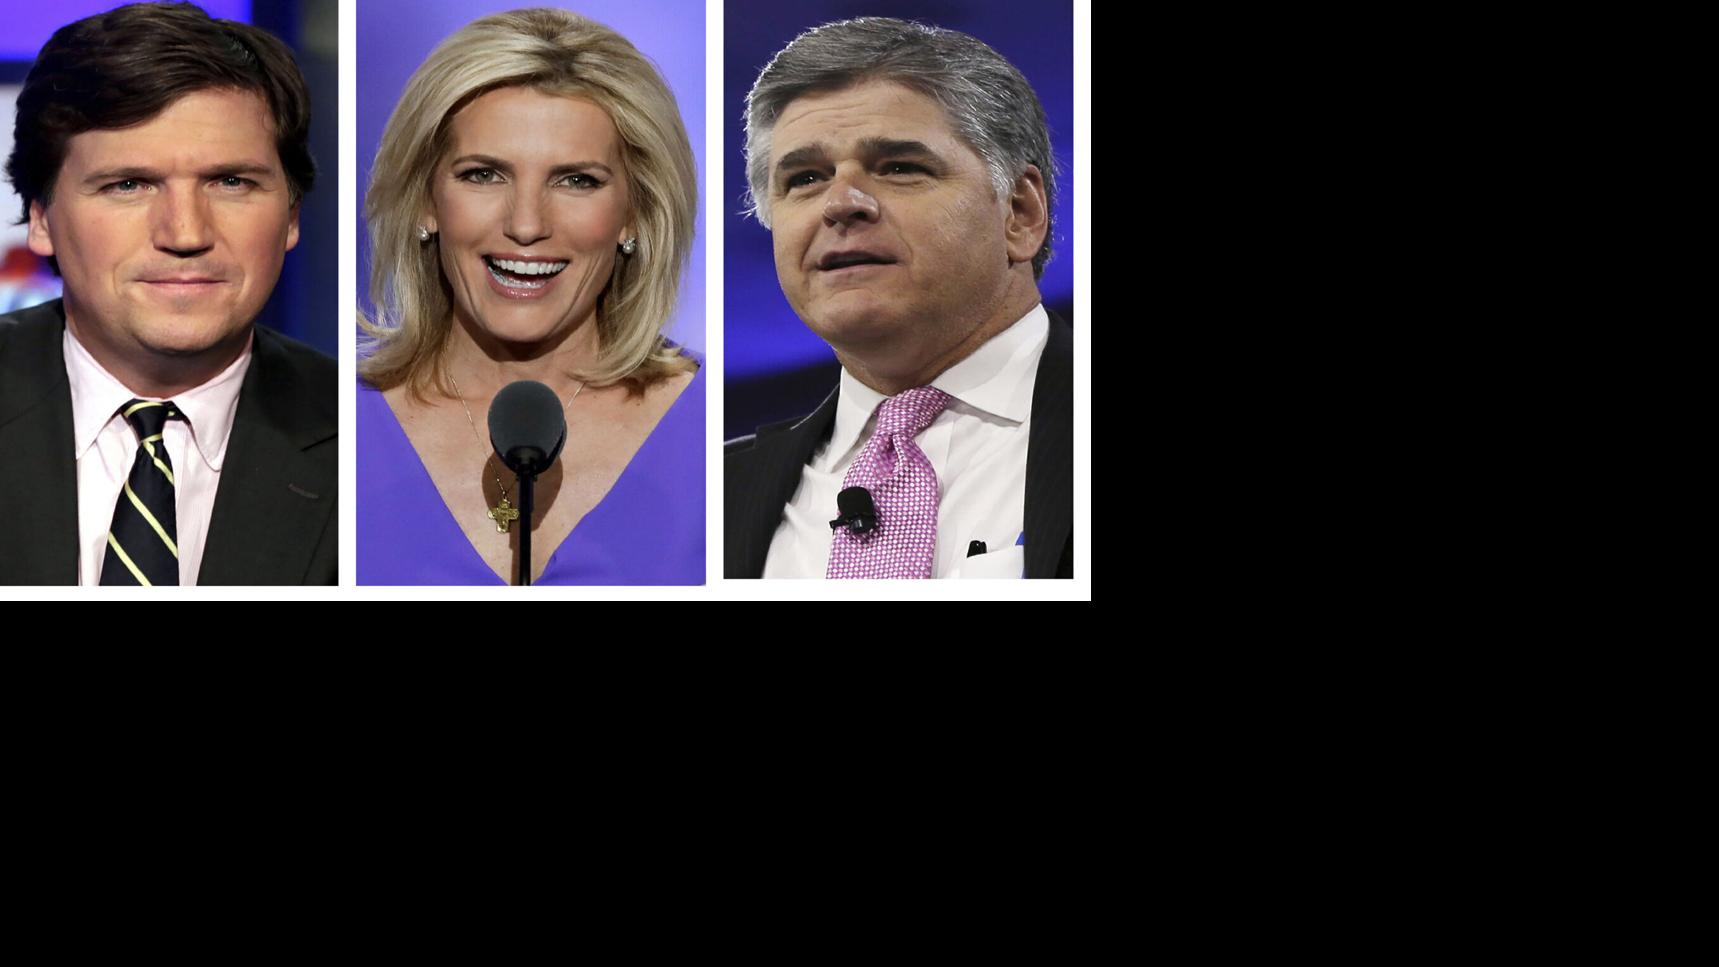 Tucker who? Fox News hosts avoid Carlson’s name after ouster